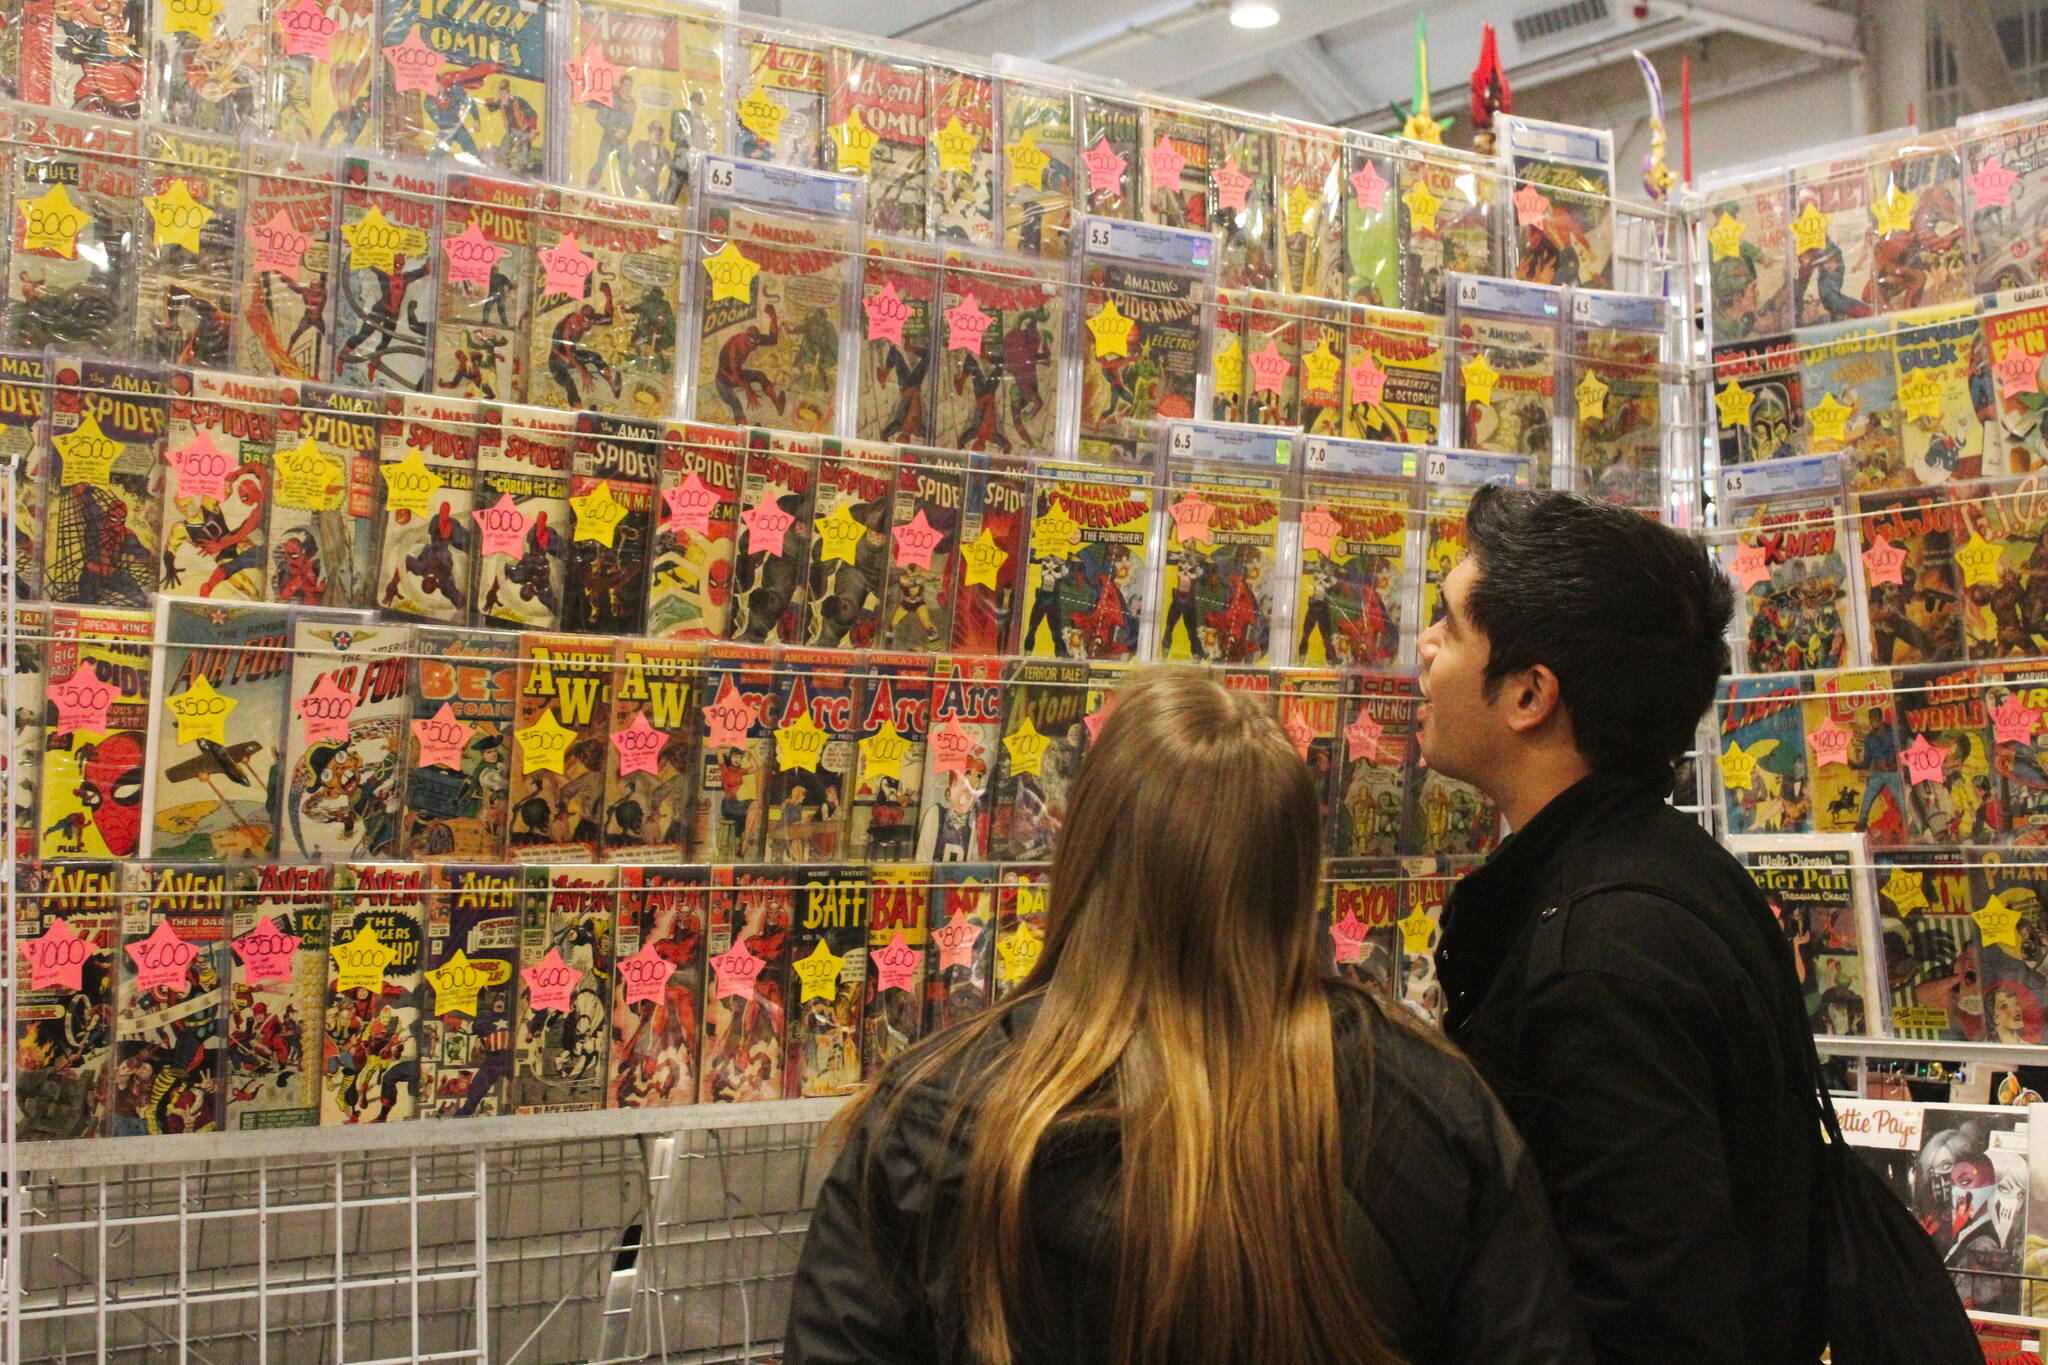 Comic book collection is still a staple of Emerald City Comic Con. Photo by Bailey Jo Josie/Sound Publishing